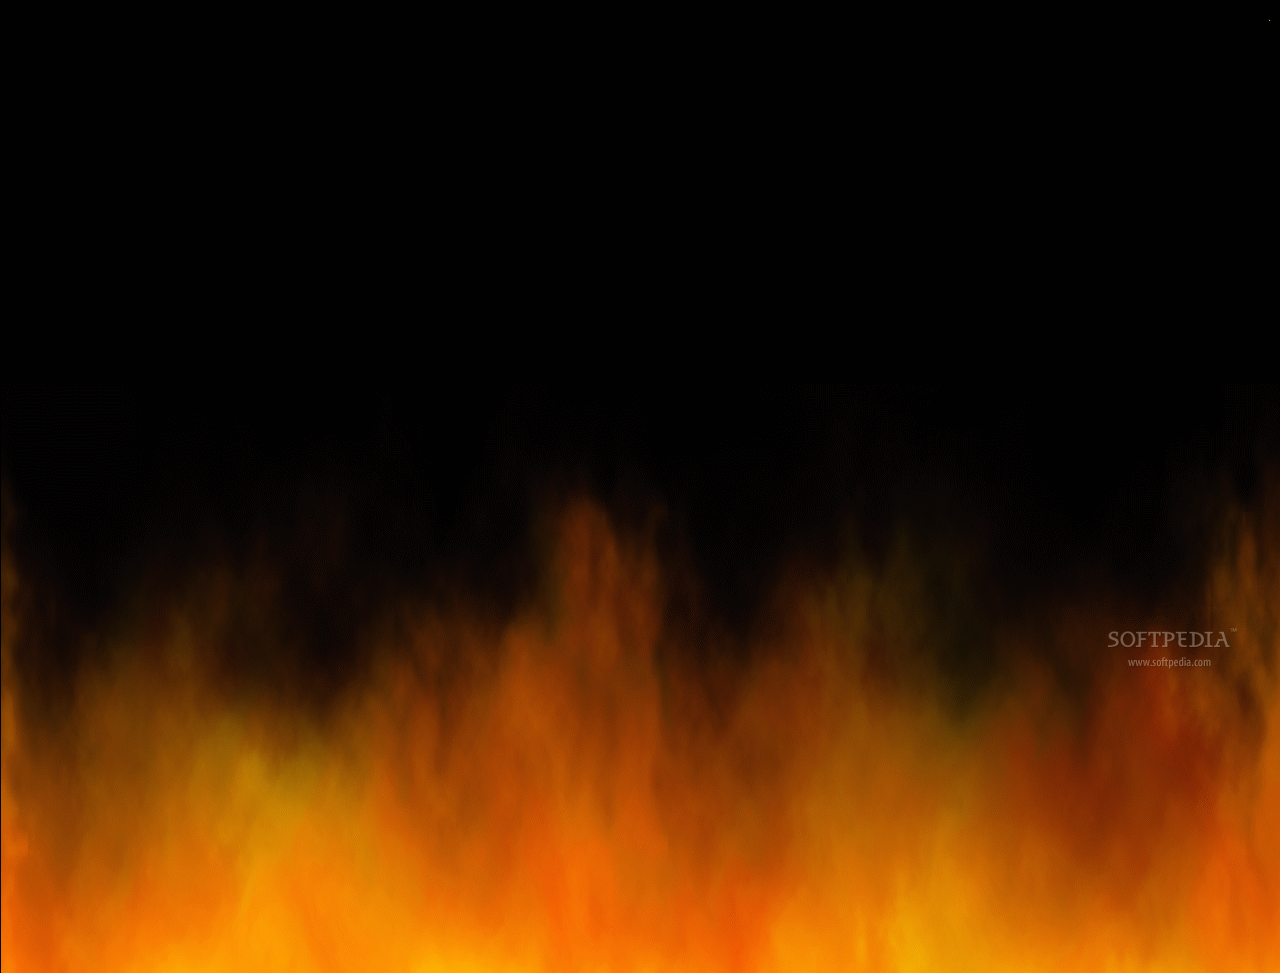 Wall Of Fire Animated Wallpaper Screenshot This Is How The